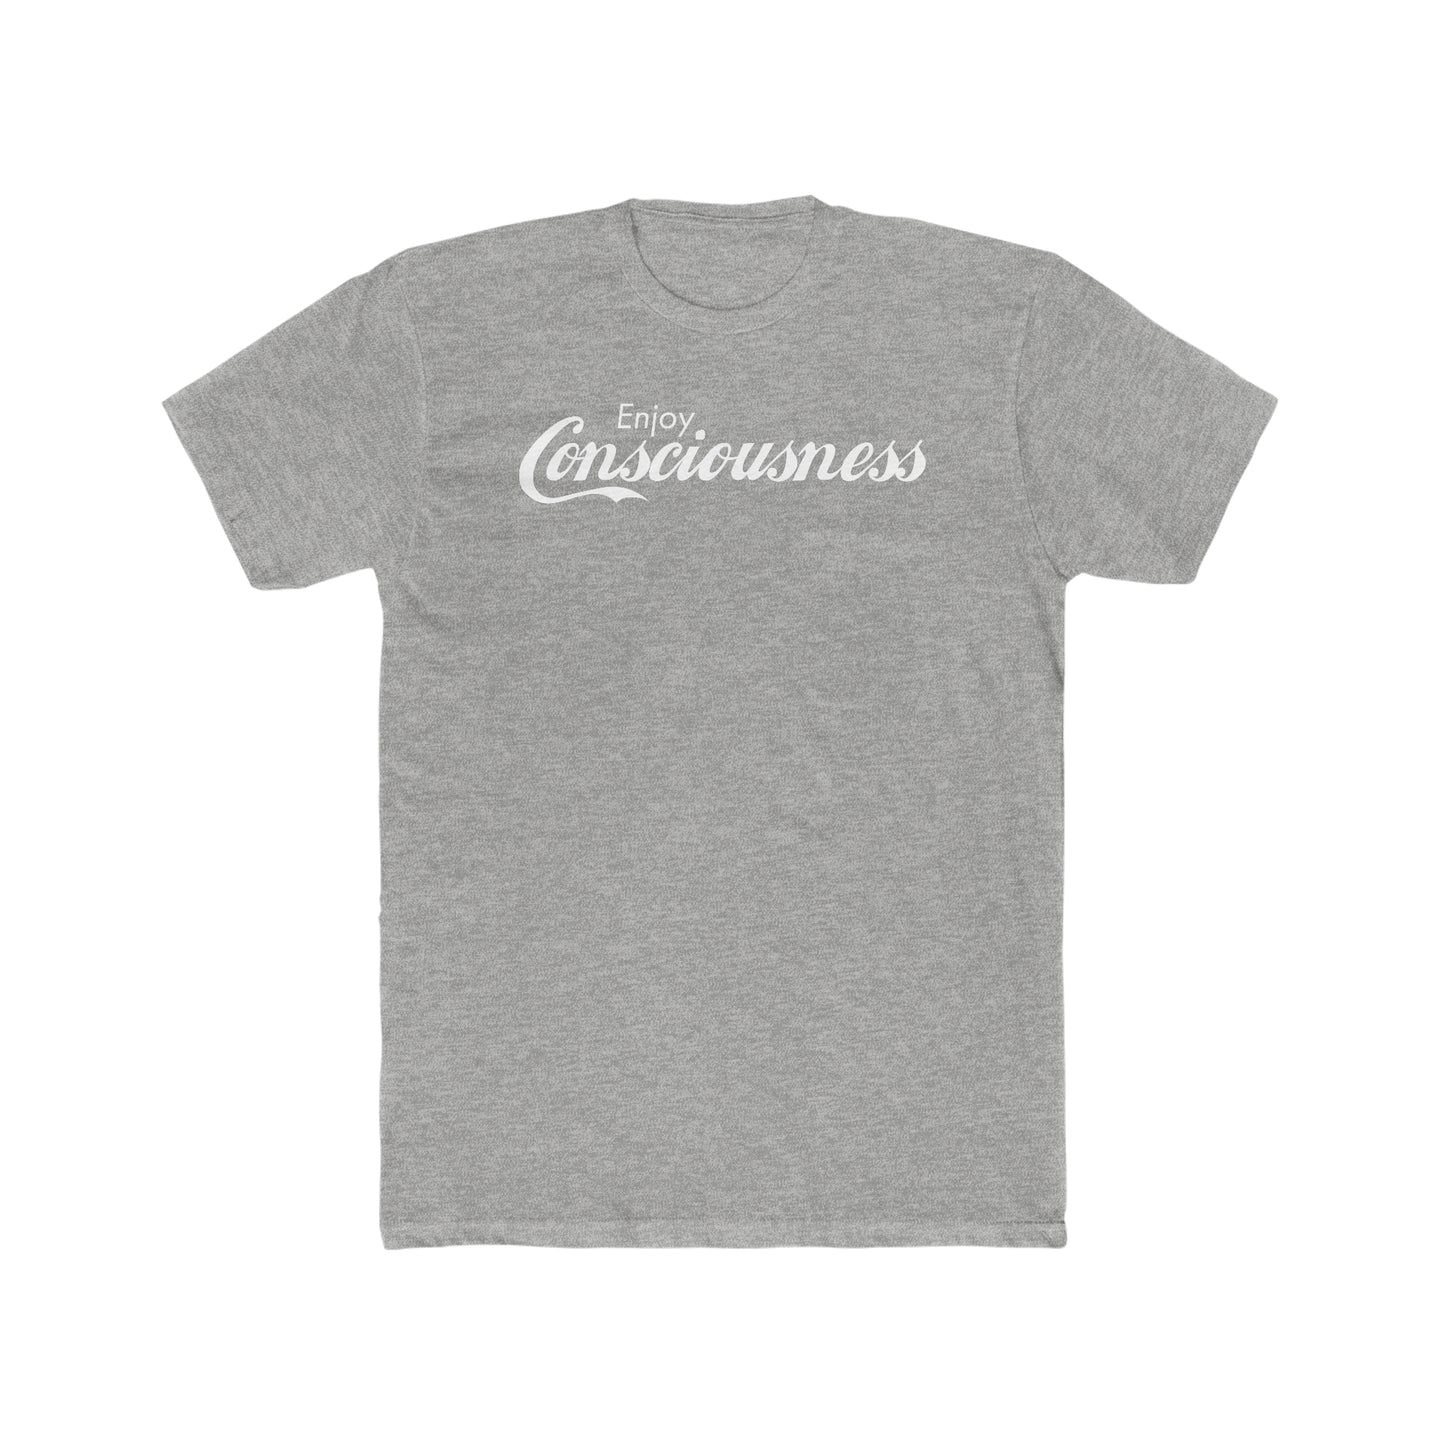 Embrace Conscious Living with Our 'Enjoy Consciousness' Unisex Cotton Crew Tee!